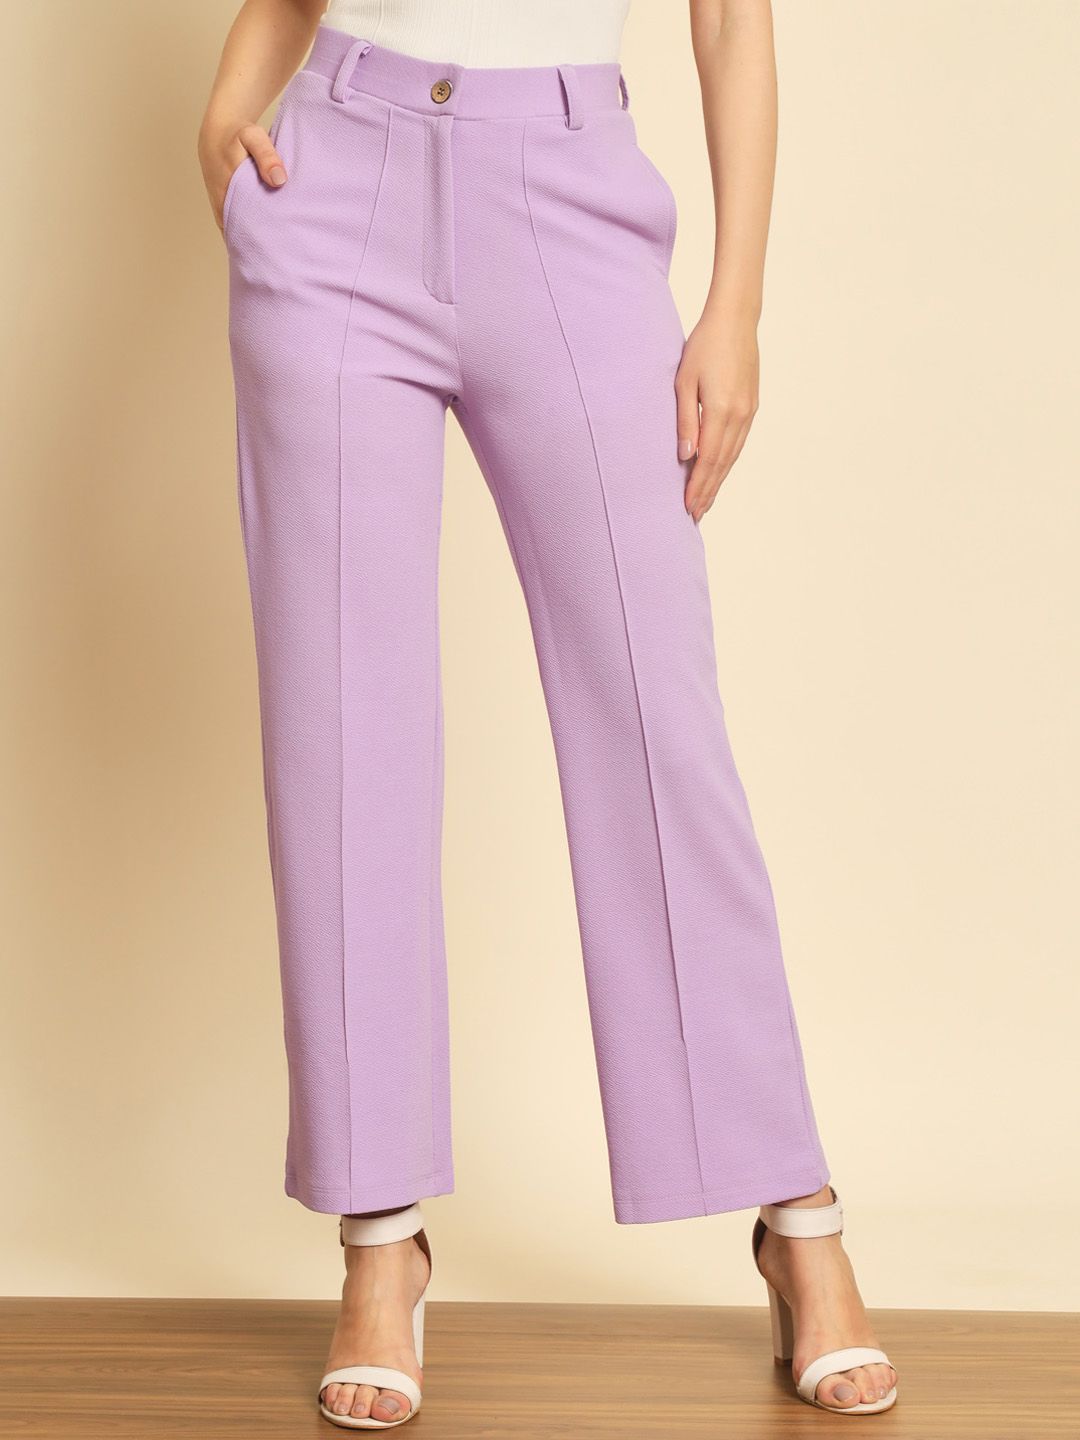 BAESD Women Smart Mid Rise Trousers Price in India